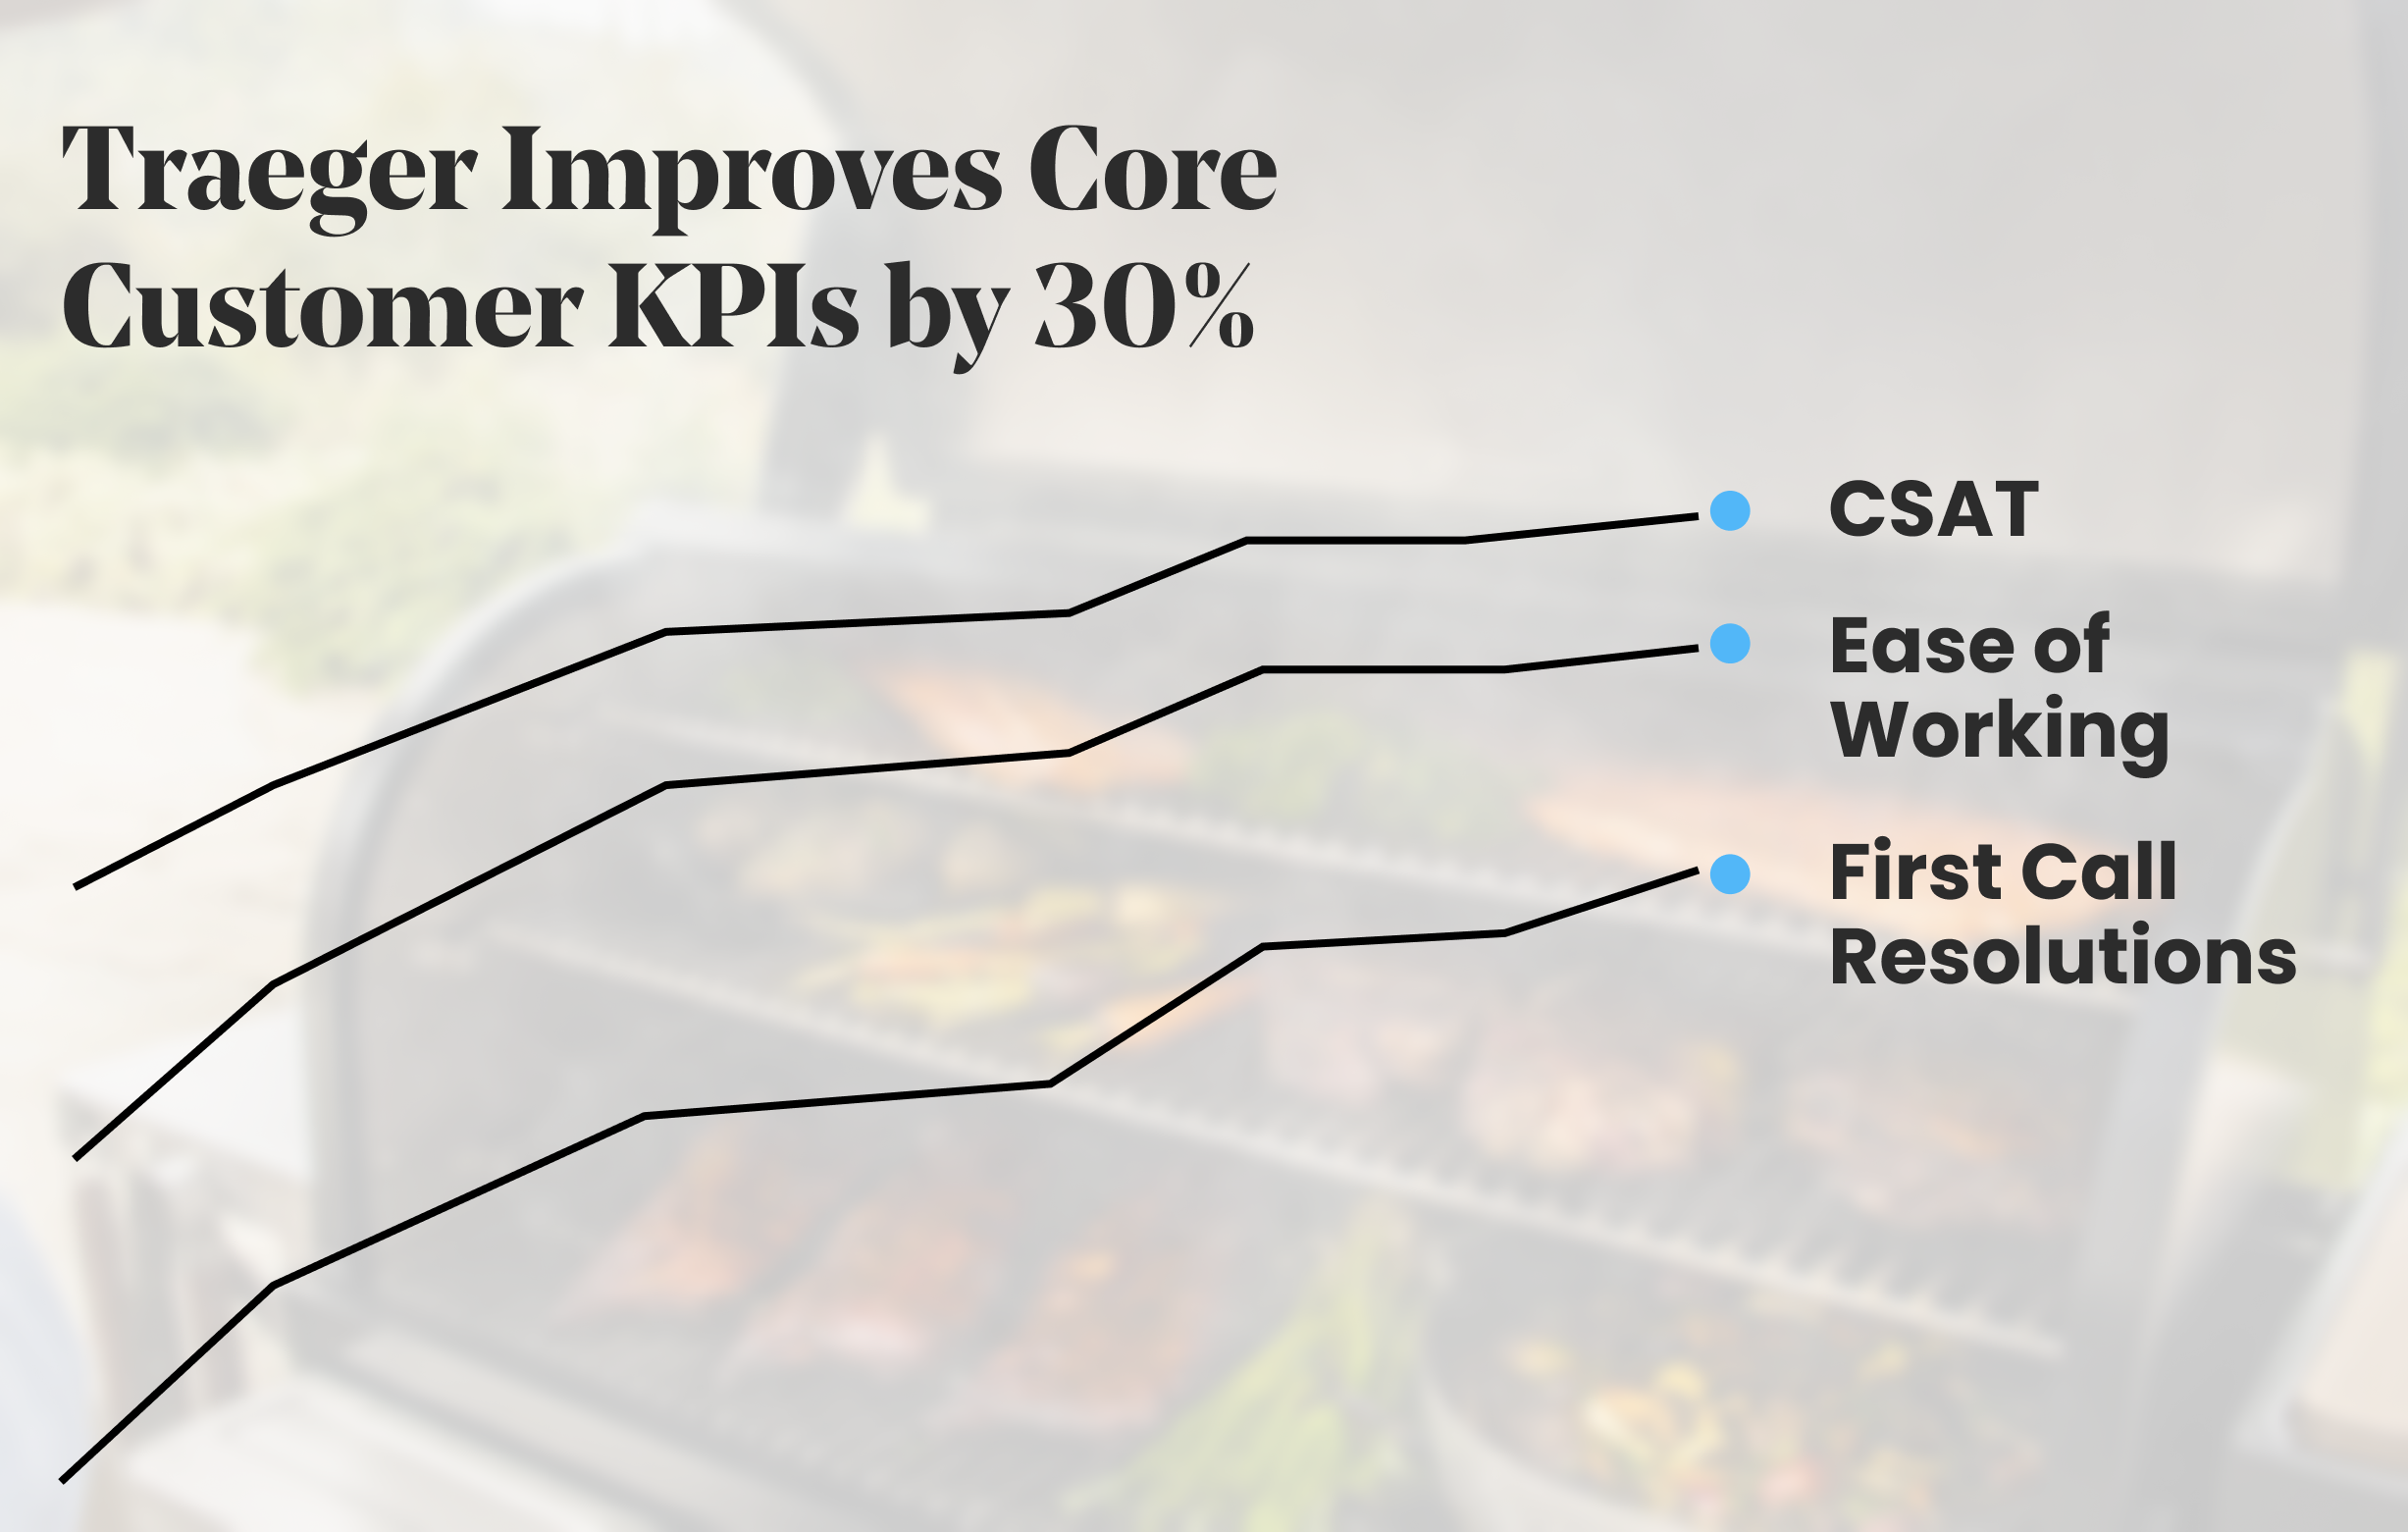 Traeger Improves Core Customer KPIs by 30%